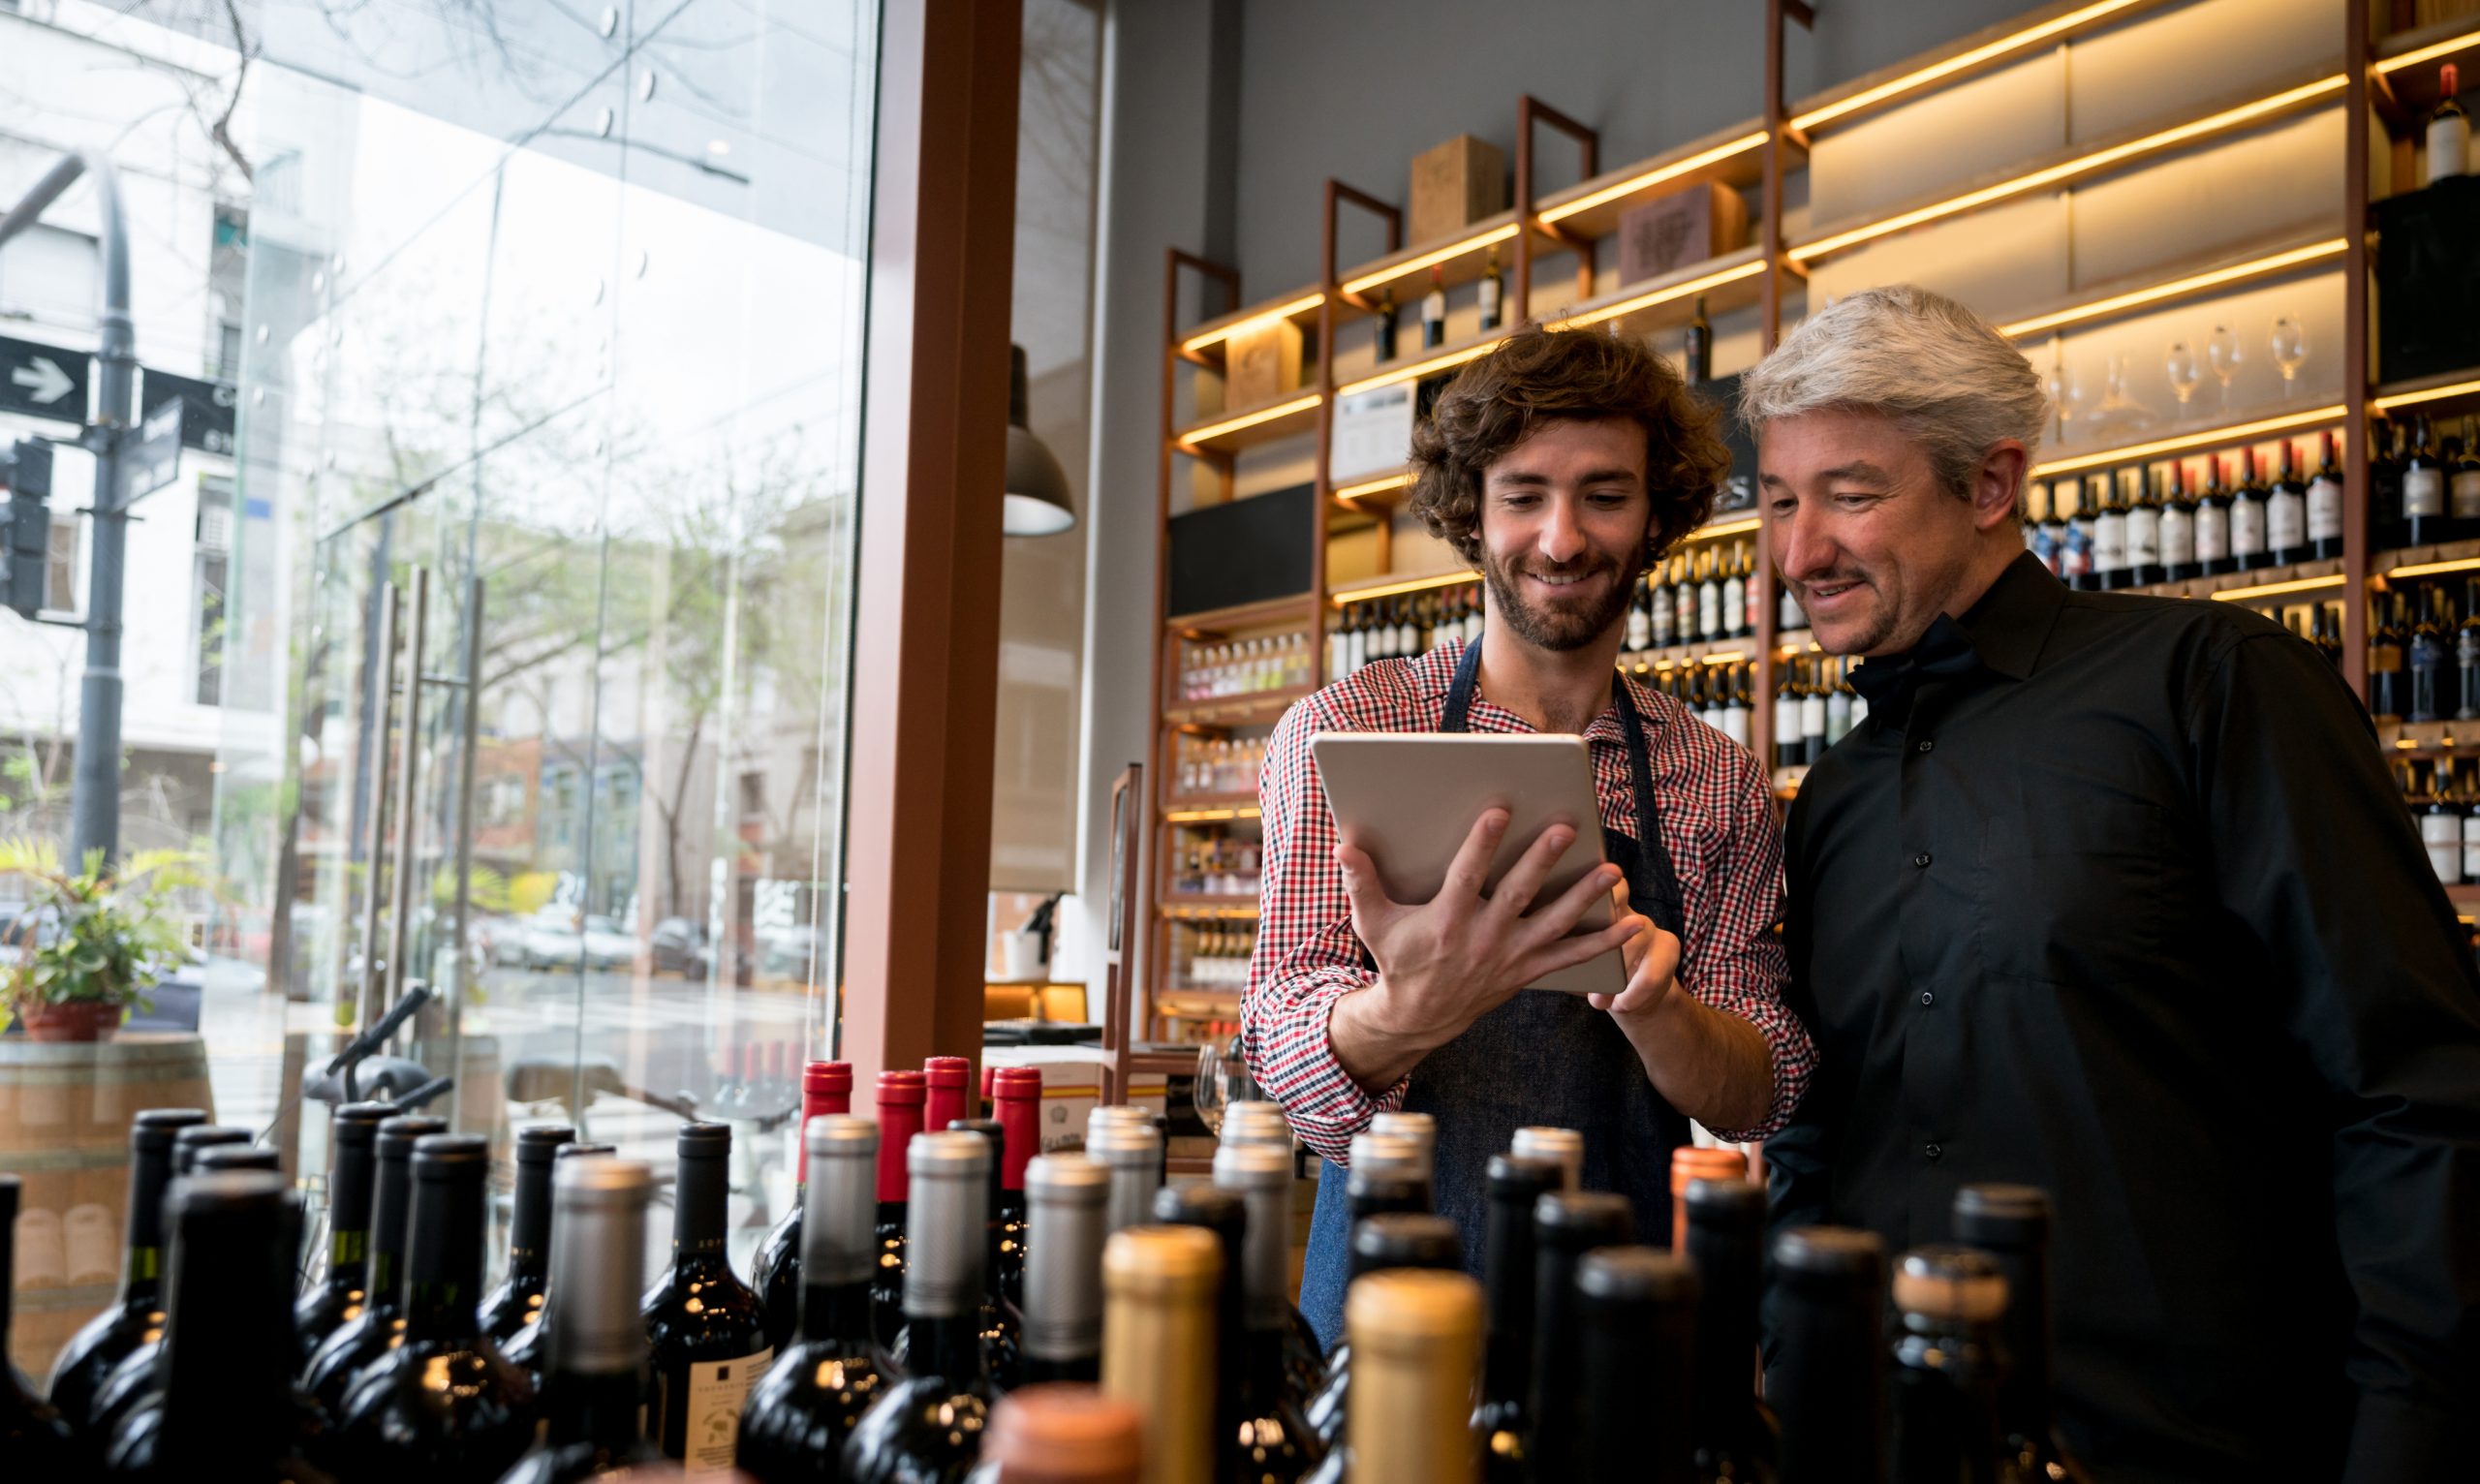 ncr counterpoint retail pos for liquor store managers looking at wine bottles